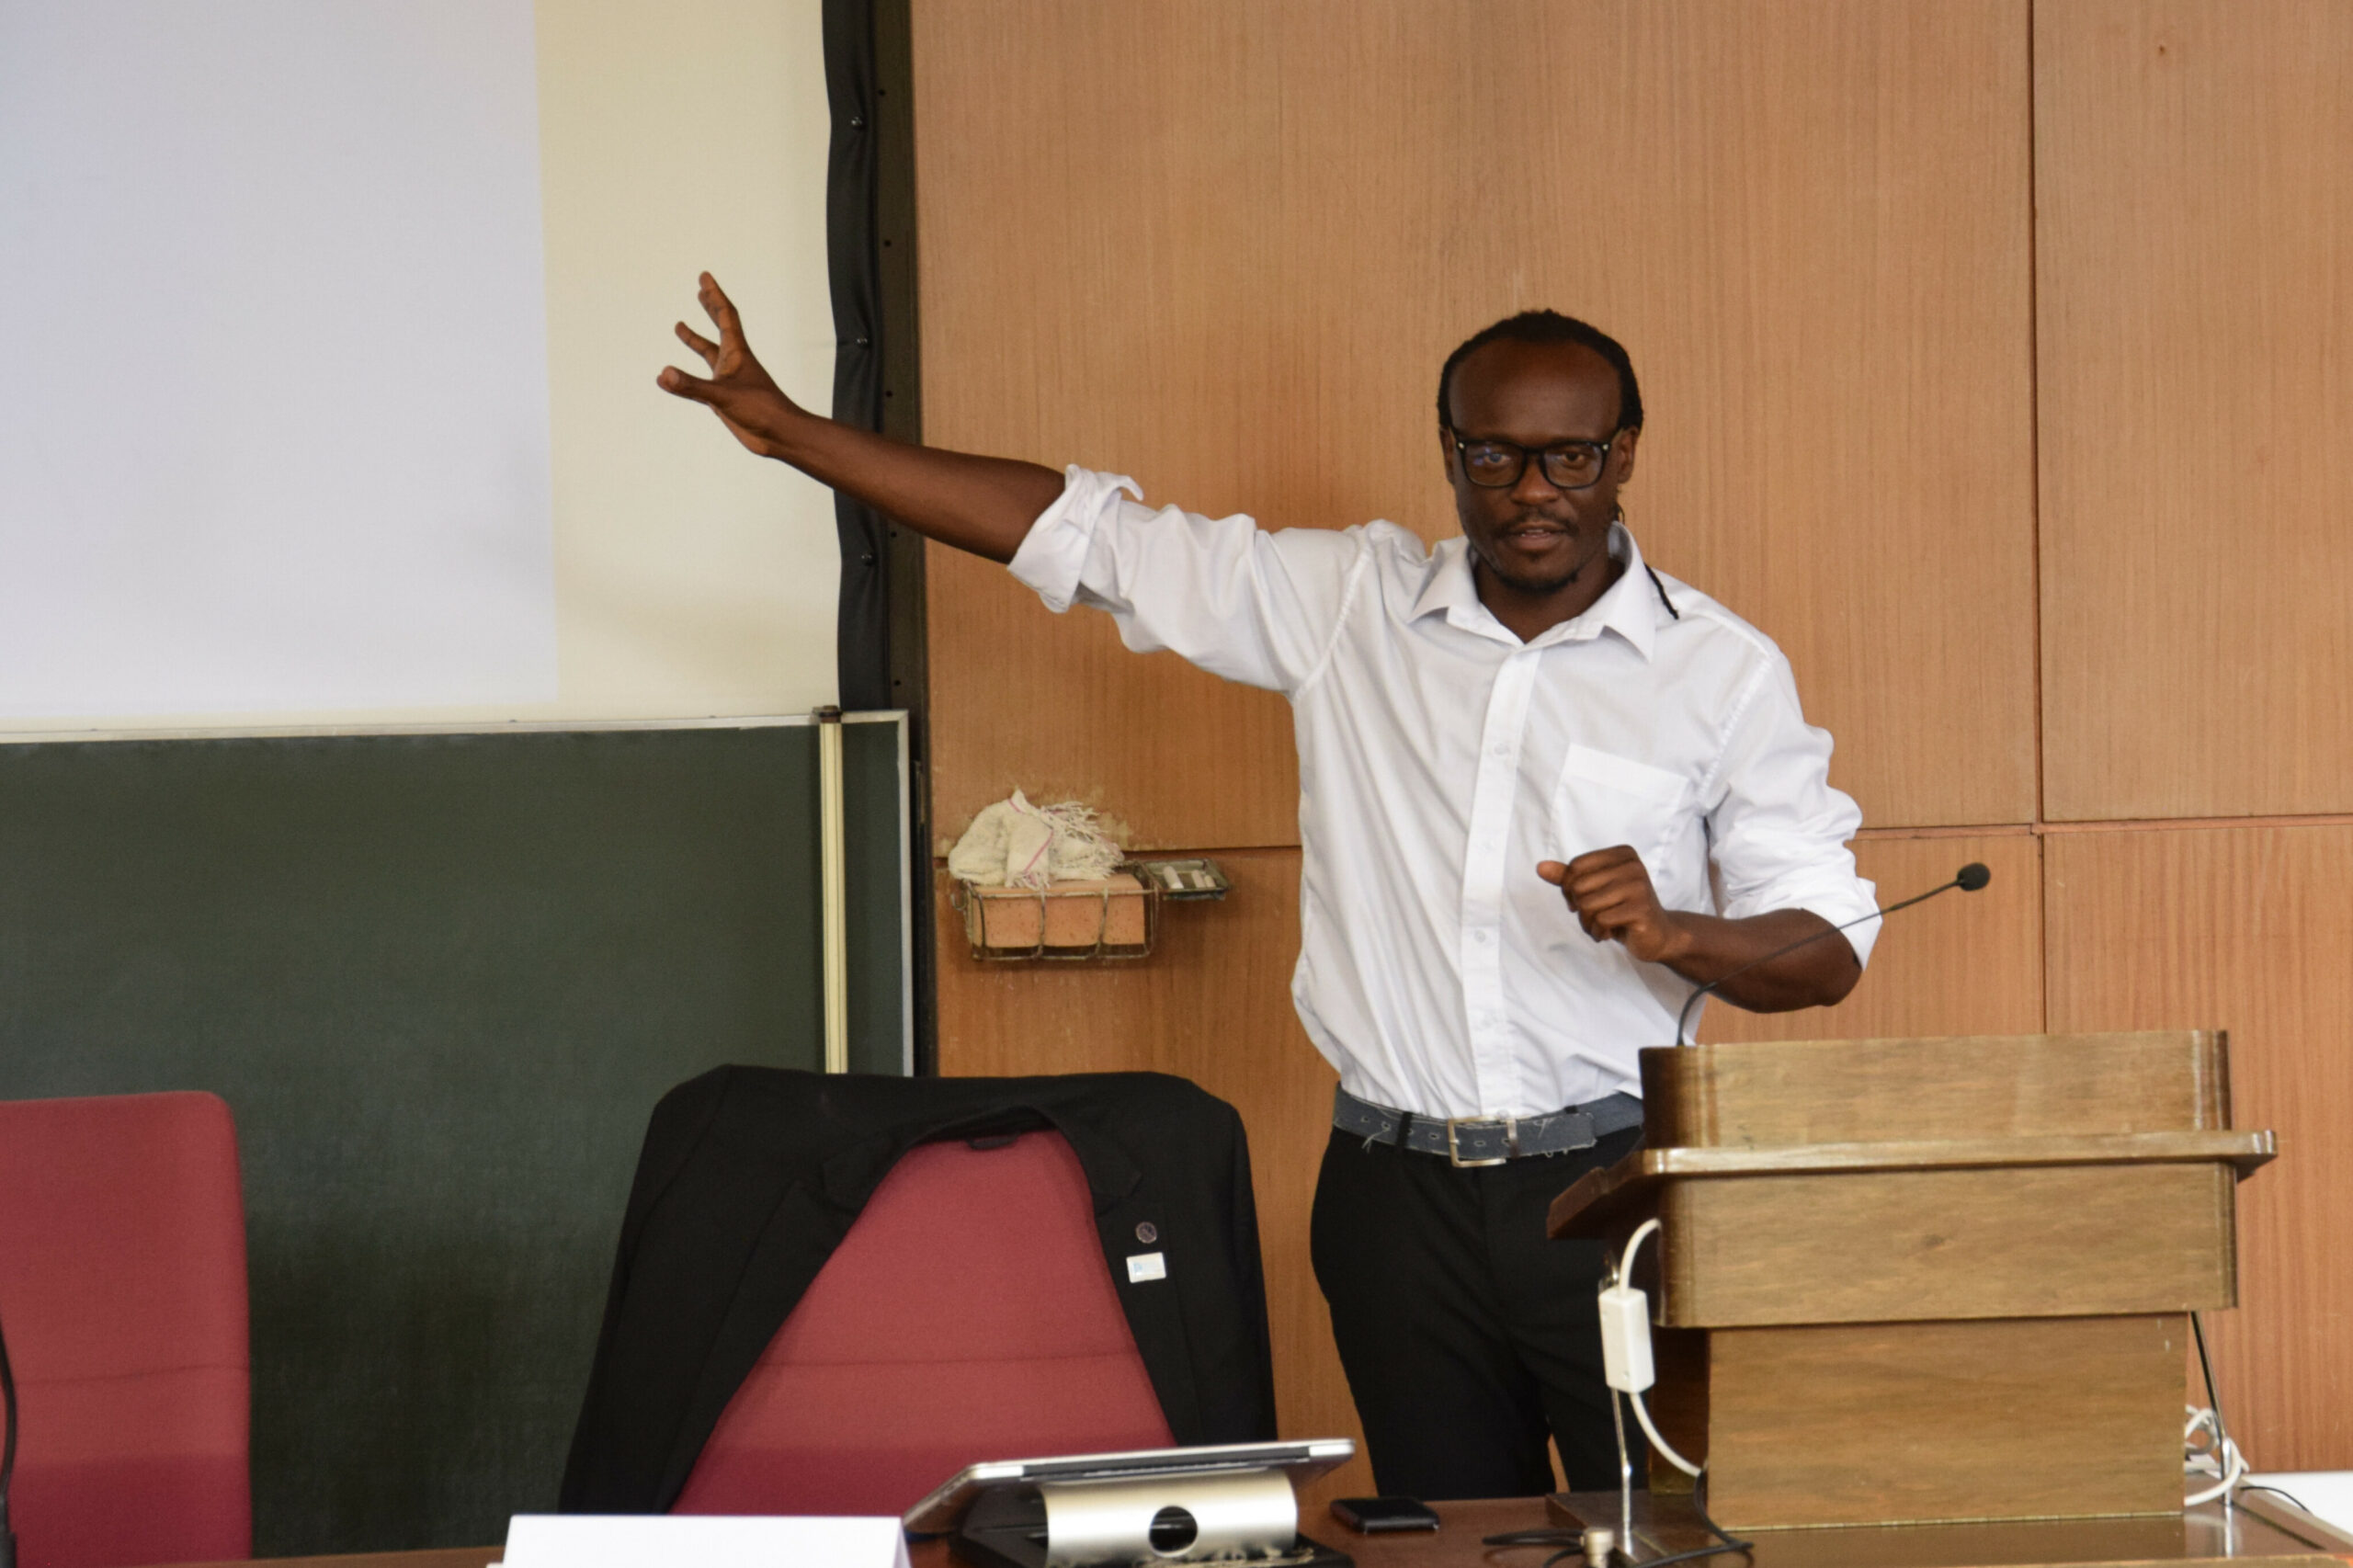 Picture of Tinashé Hofisi during lecture.